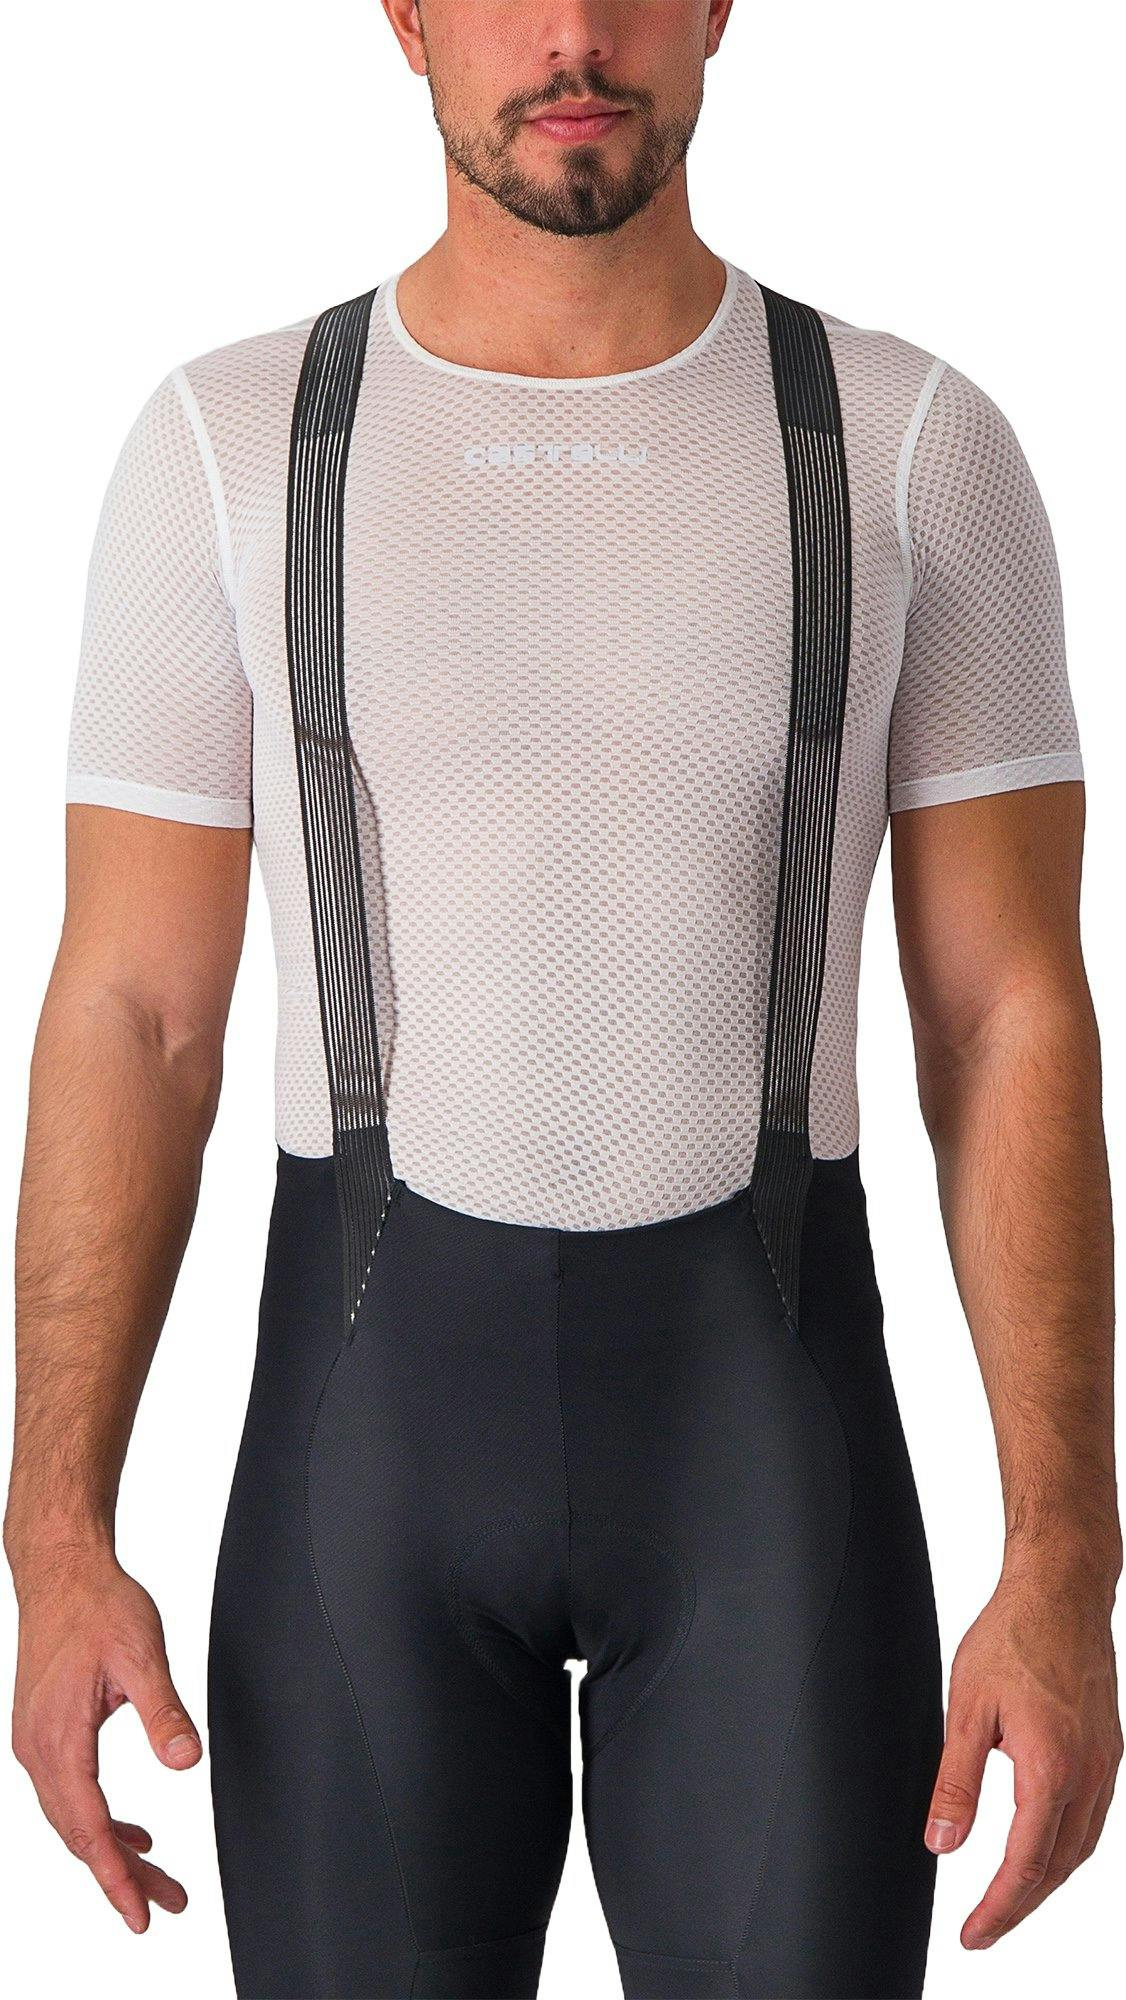 Product image for Pro Mesh 2.0 Short Sleeve Base Layer Jersey - Men's